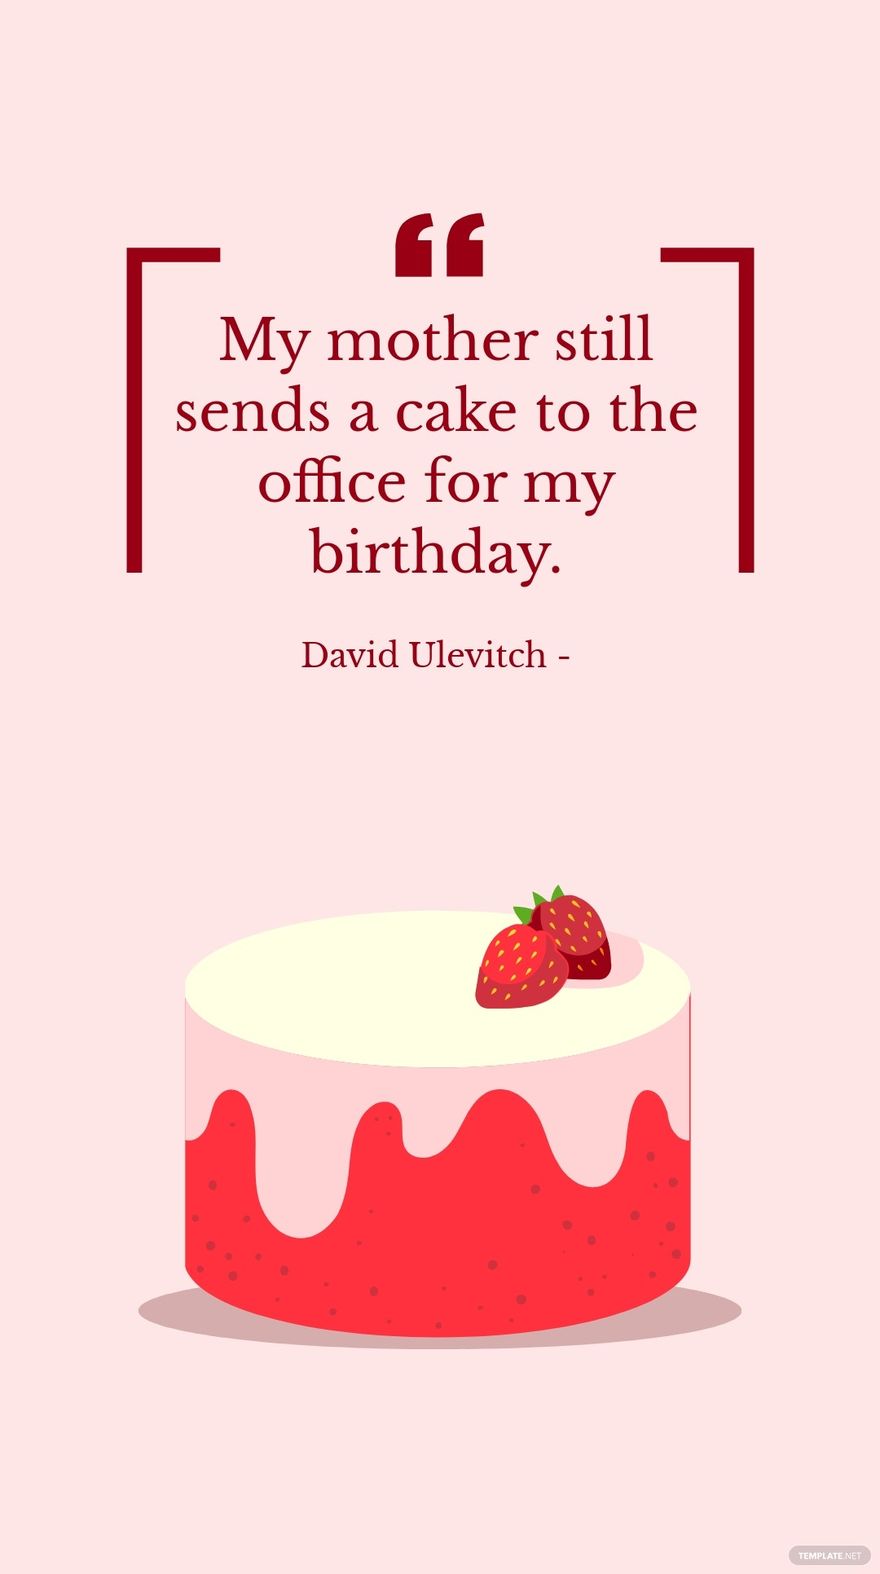 David Ulevitch - My mother still sends a cake to the office for my birthday. in JPG